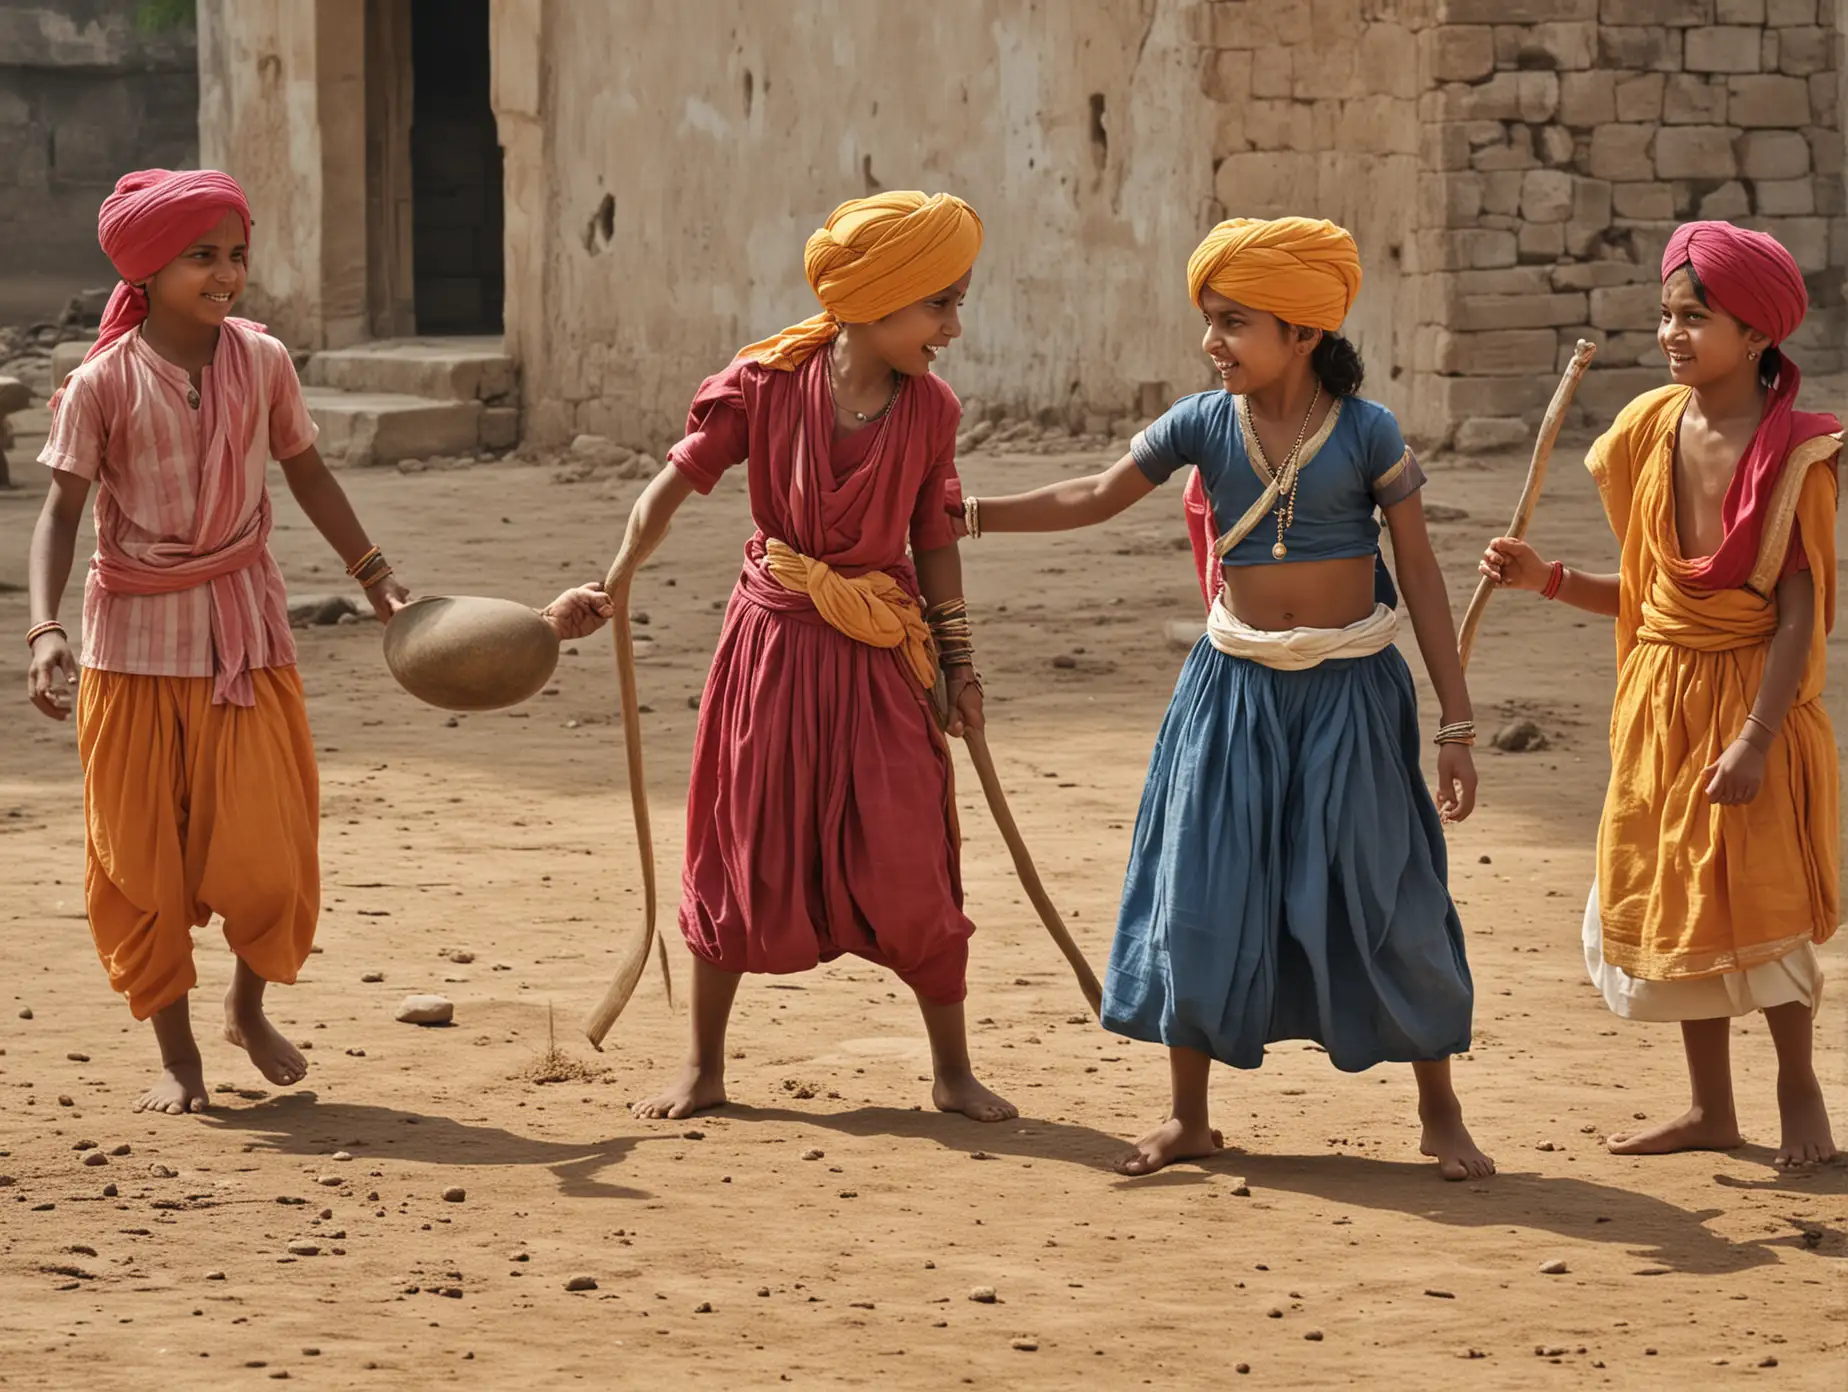 young sikh children playing. set 300 years ago in India. Girls and boys. 